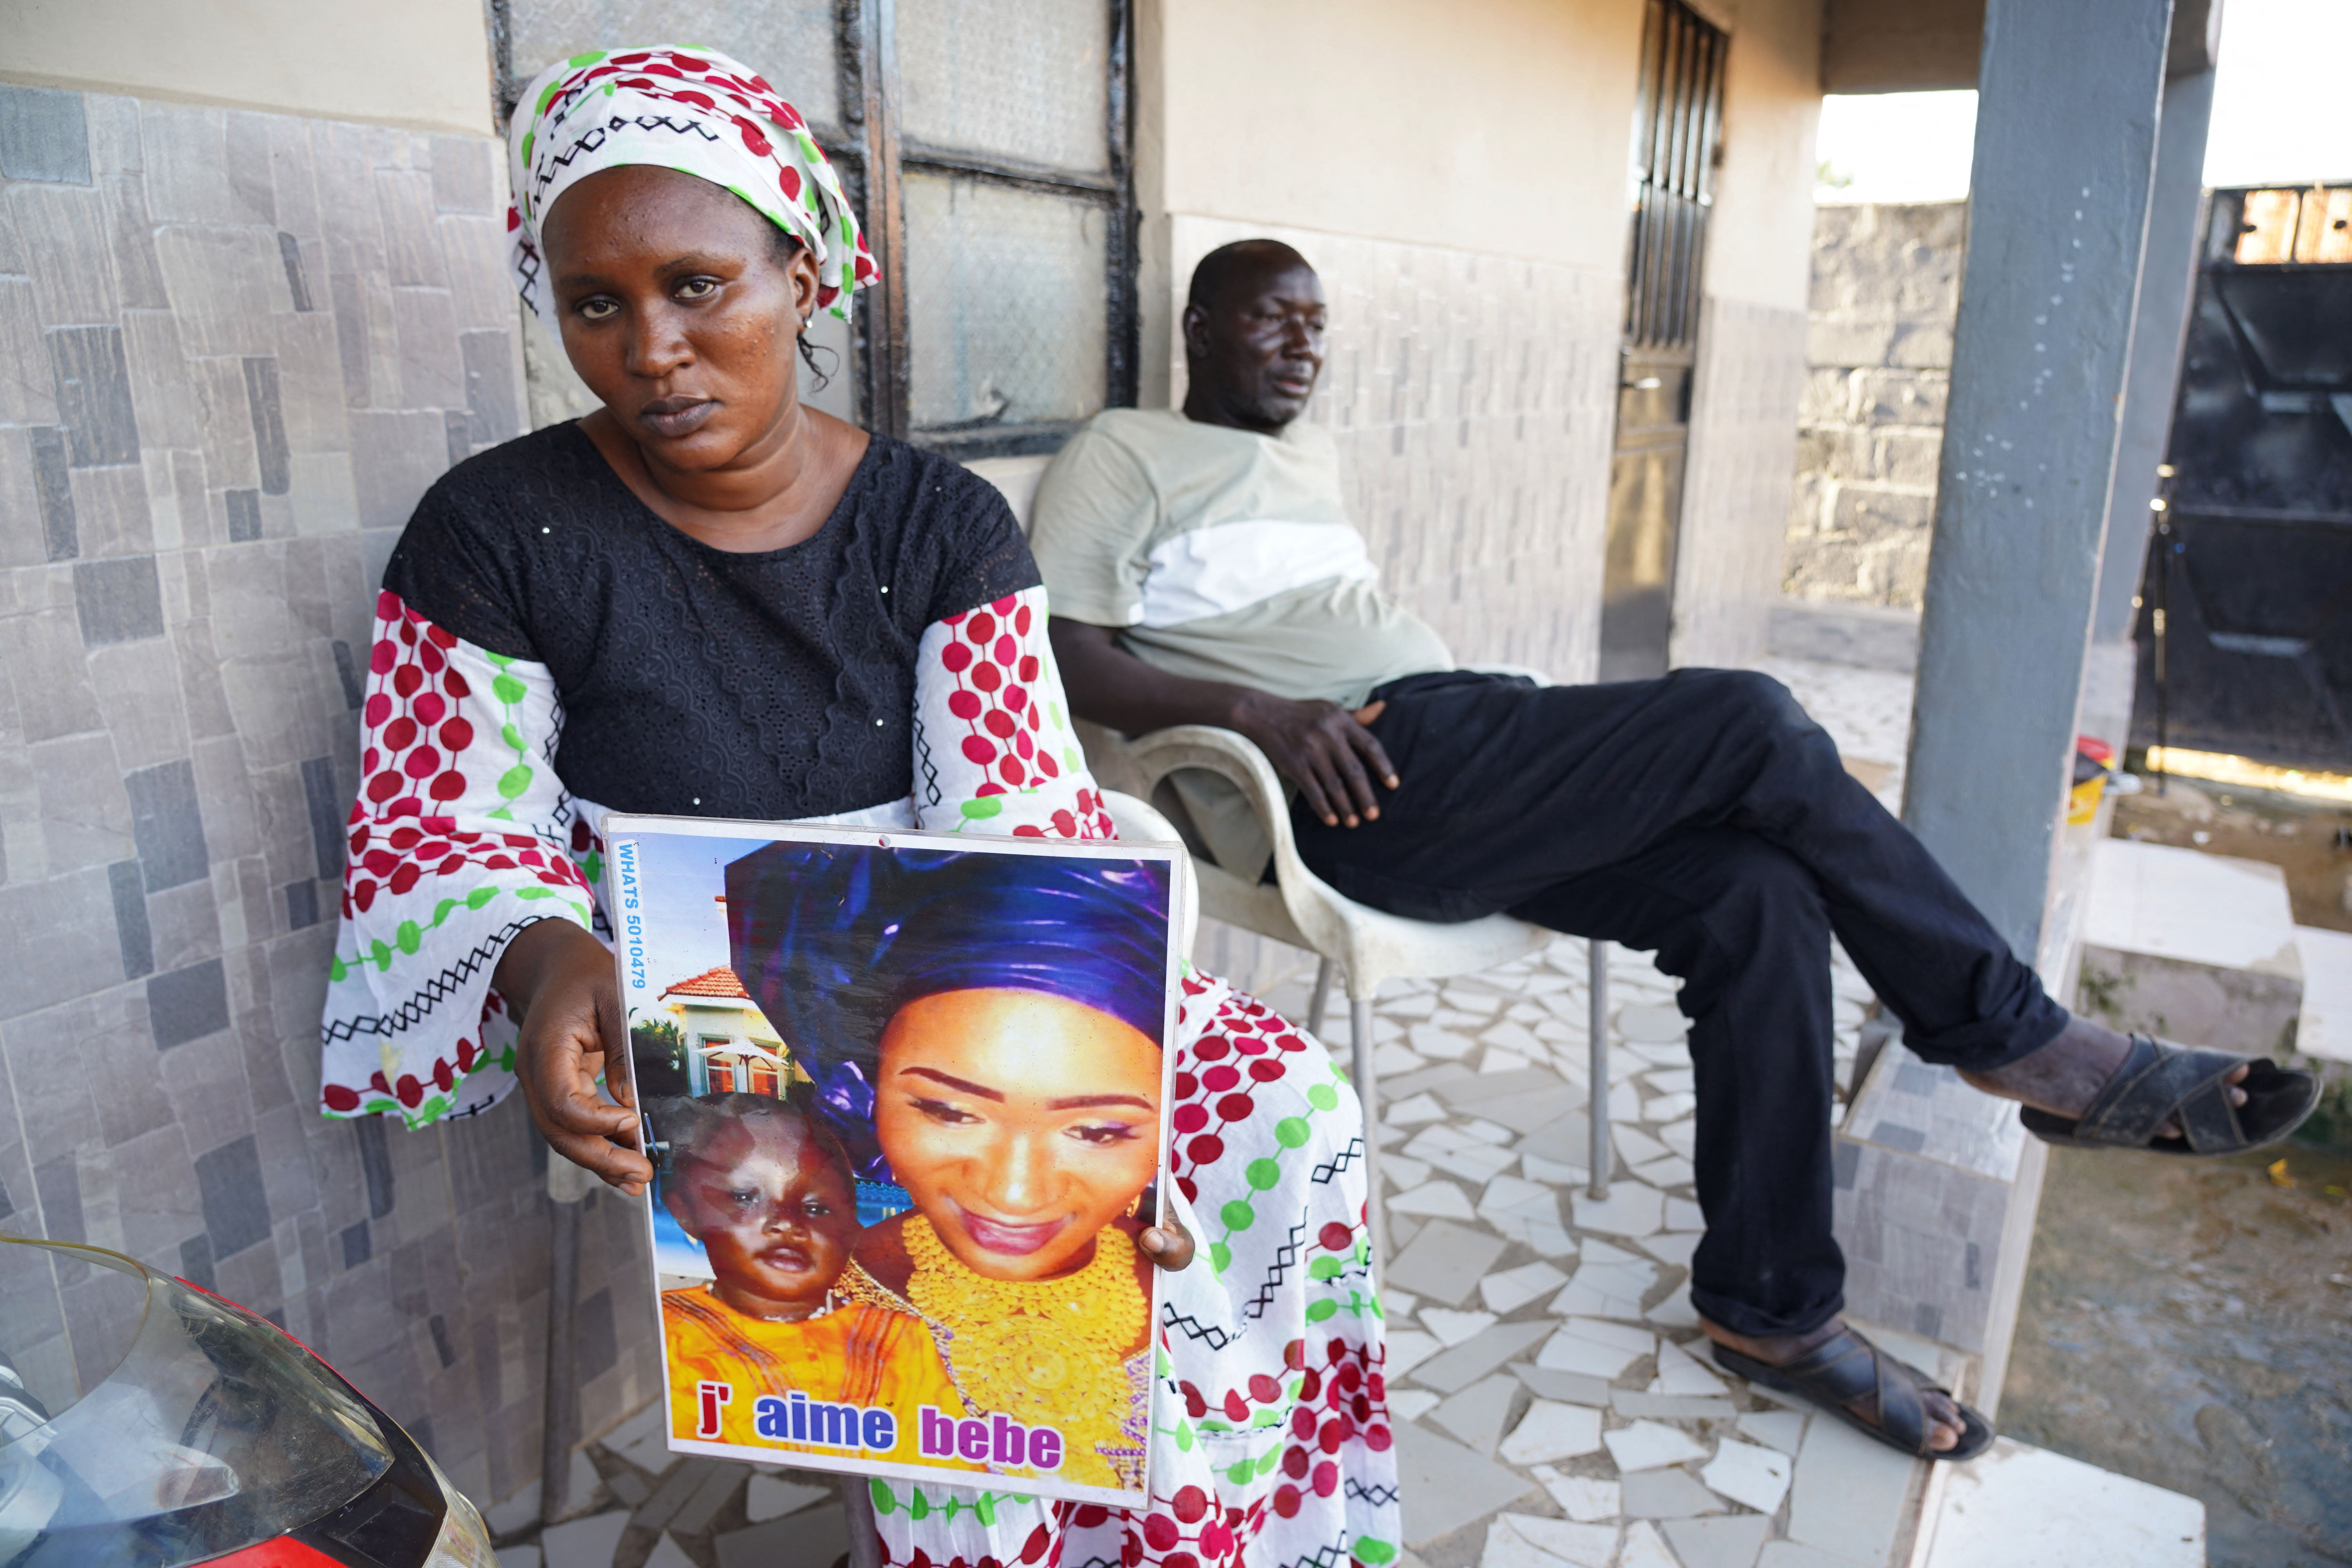 File Mariama Kuyateh, 30, holds up a picture of her late son Musawho died from acute kidney failure, in Banjul